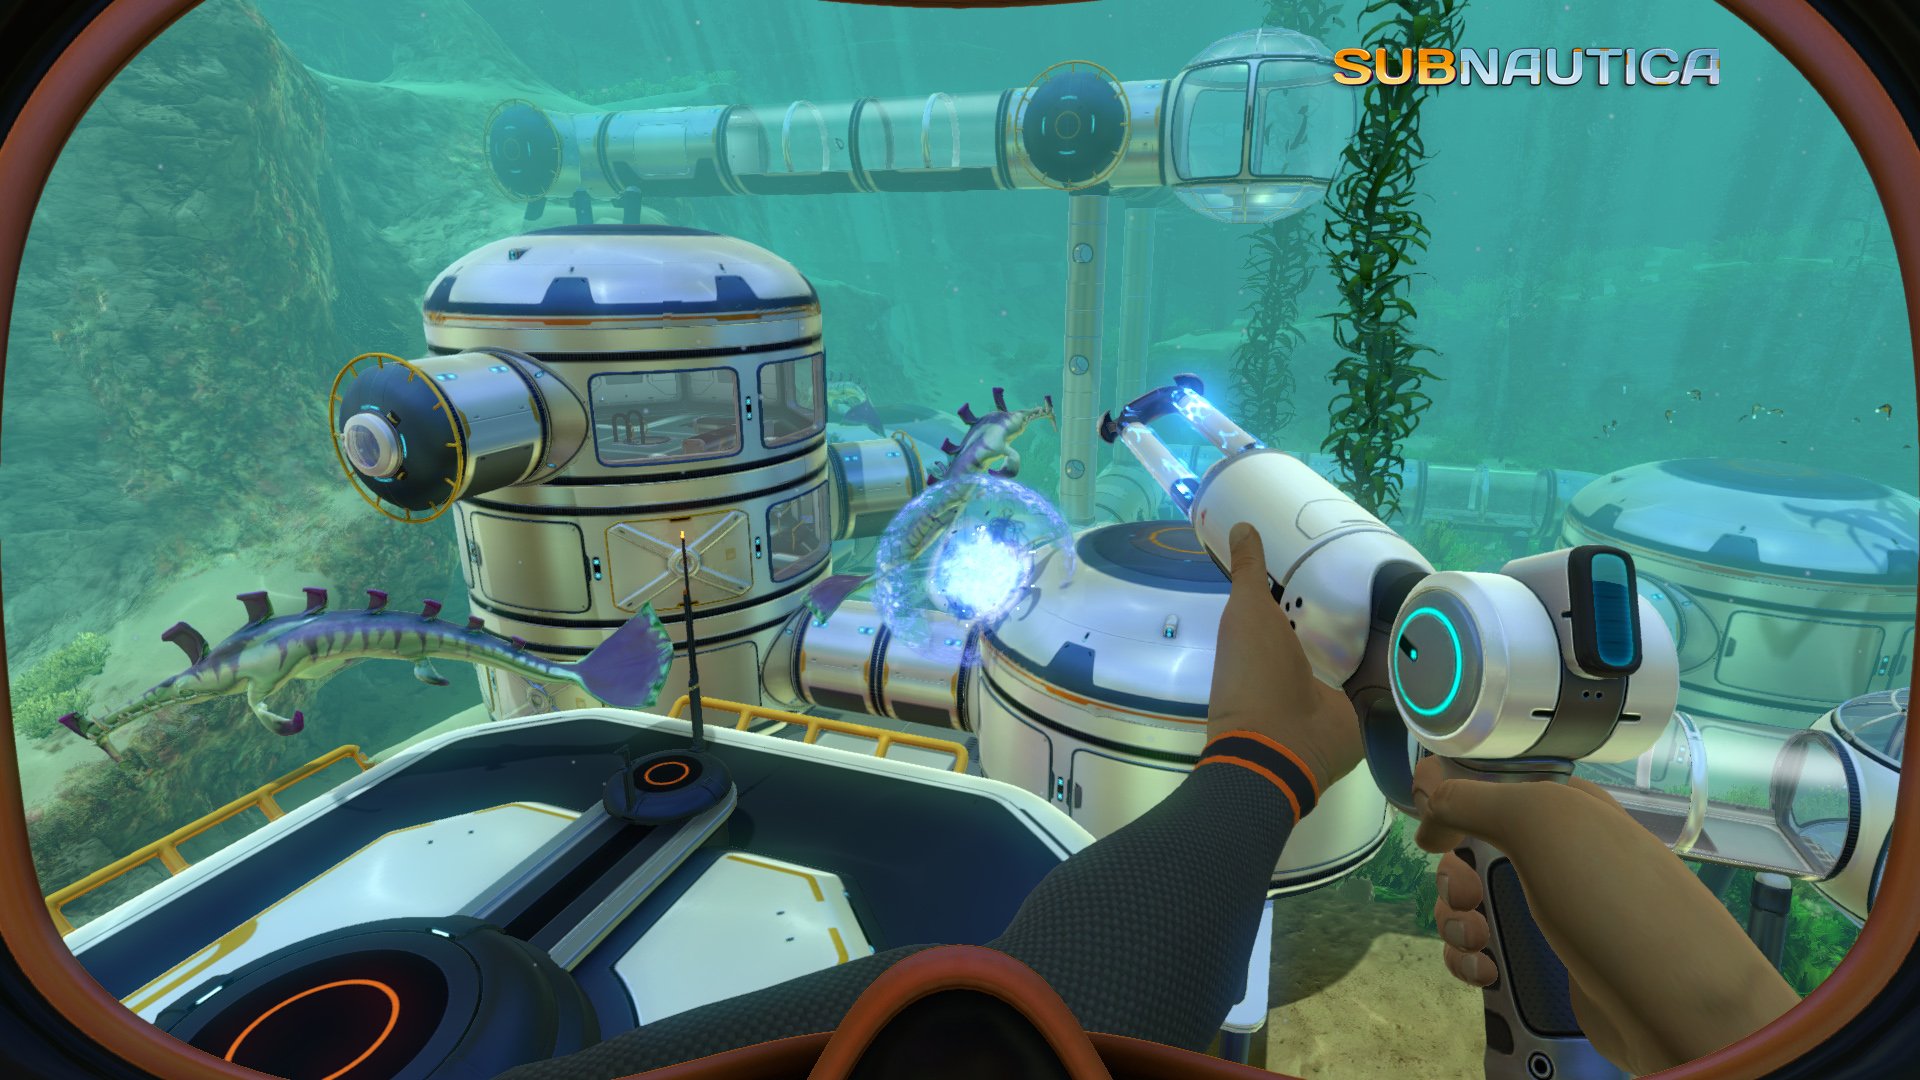 Subnautica Dev’s Ship Springing Leaks as Offensive History Surfaces [Updated]